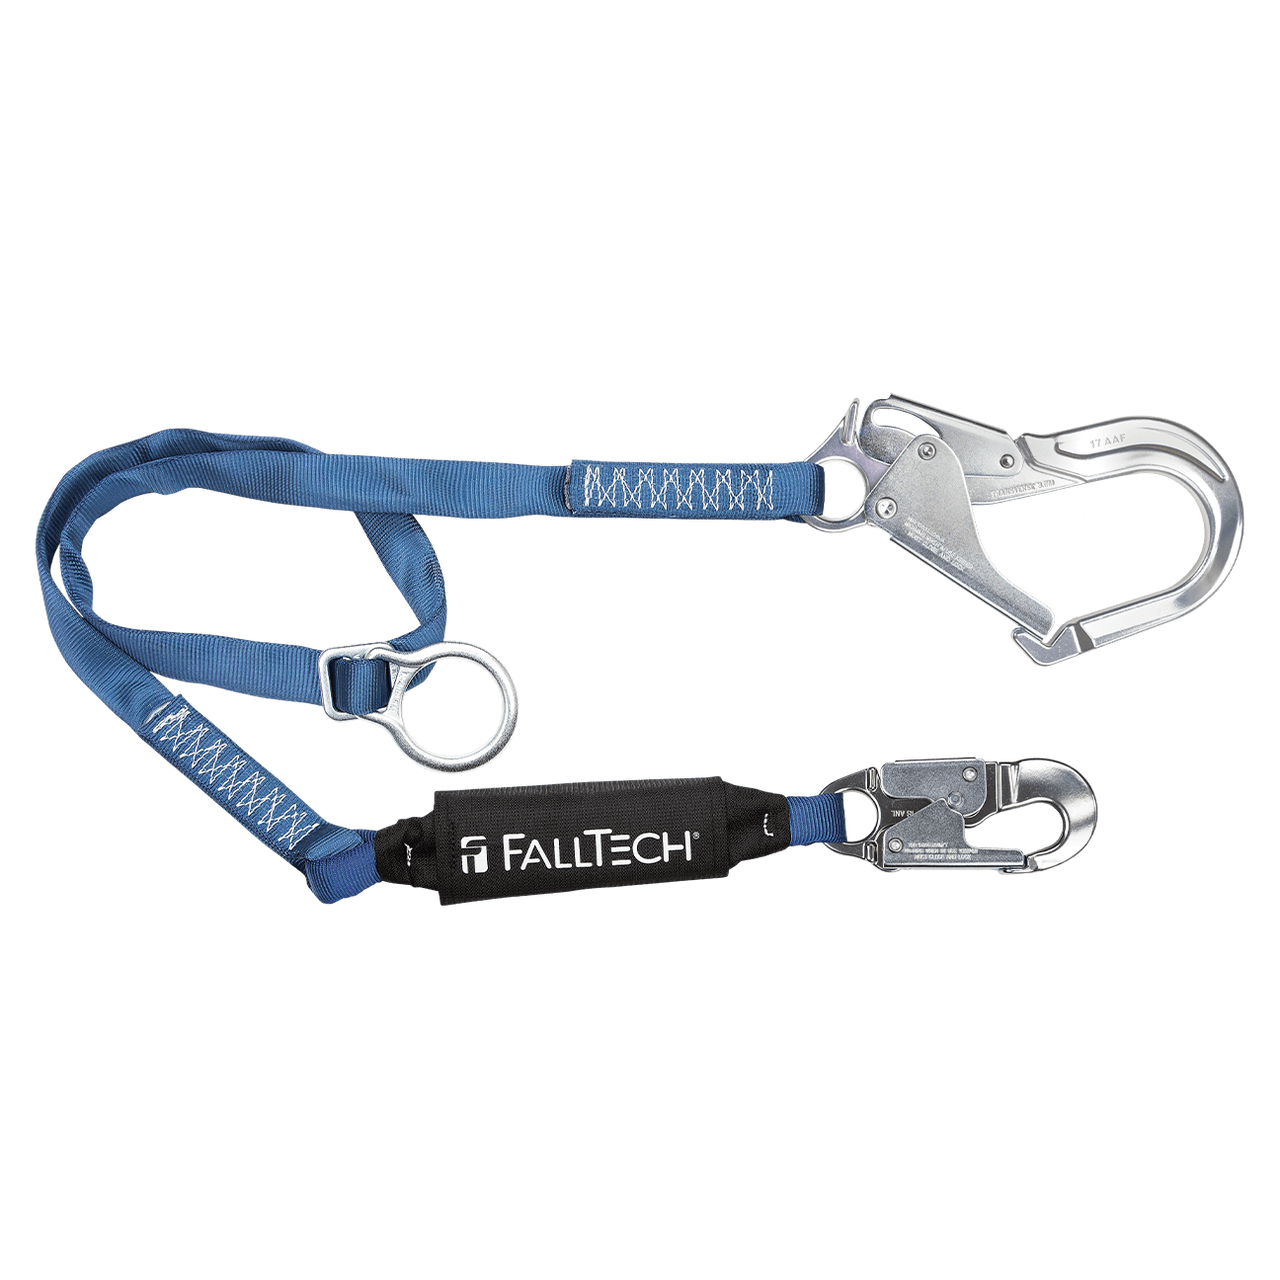 FallTech 6 Foot ViewPack Tie-Back Single Leg Shock Absorbing Lanyard from Columbia Safety